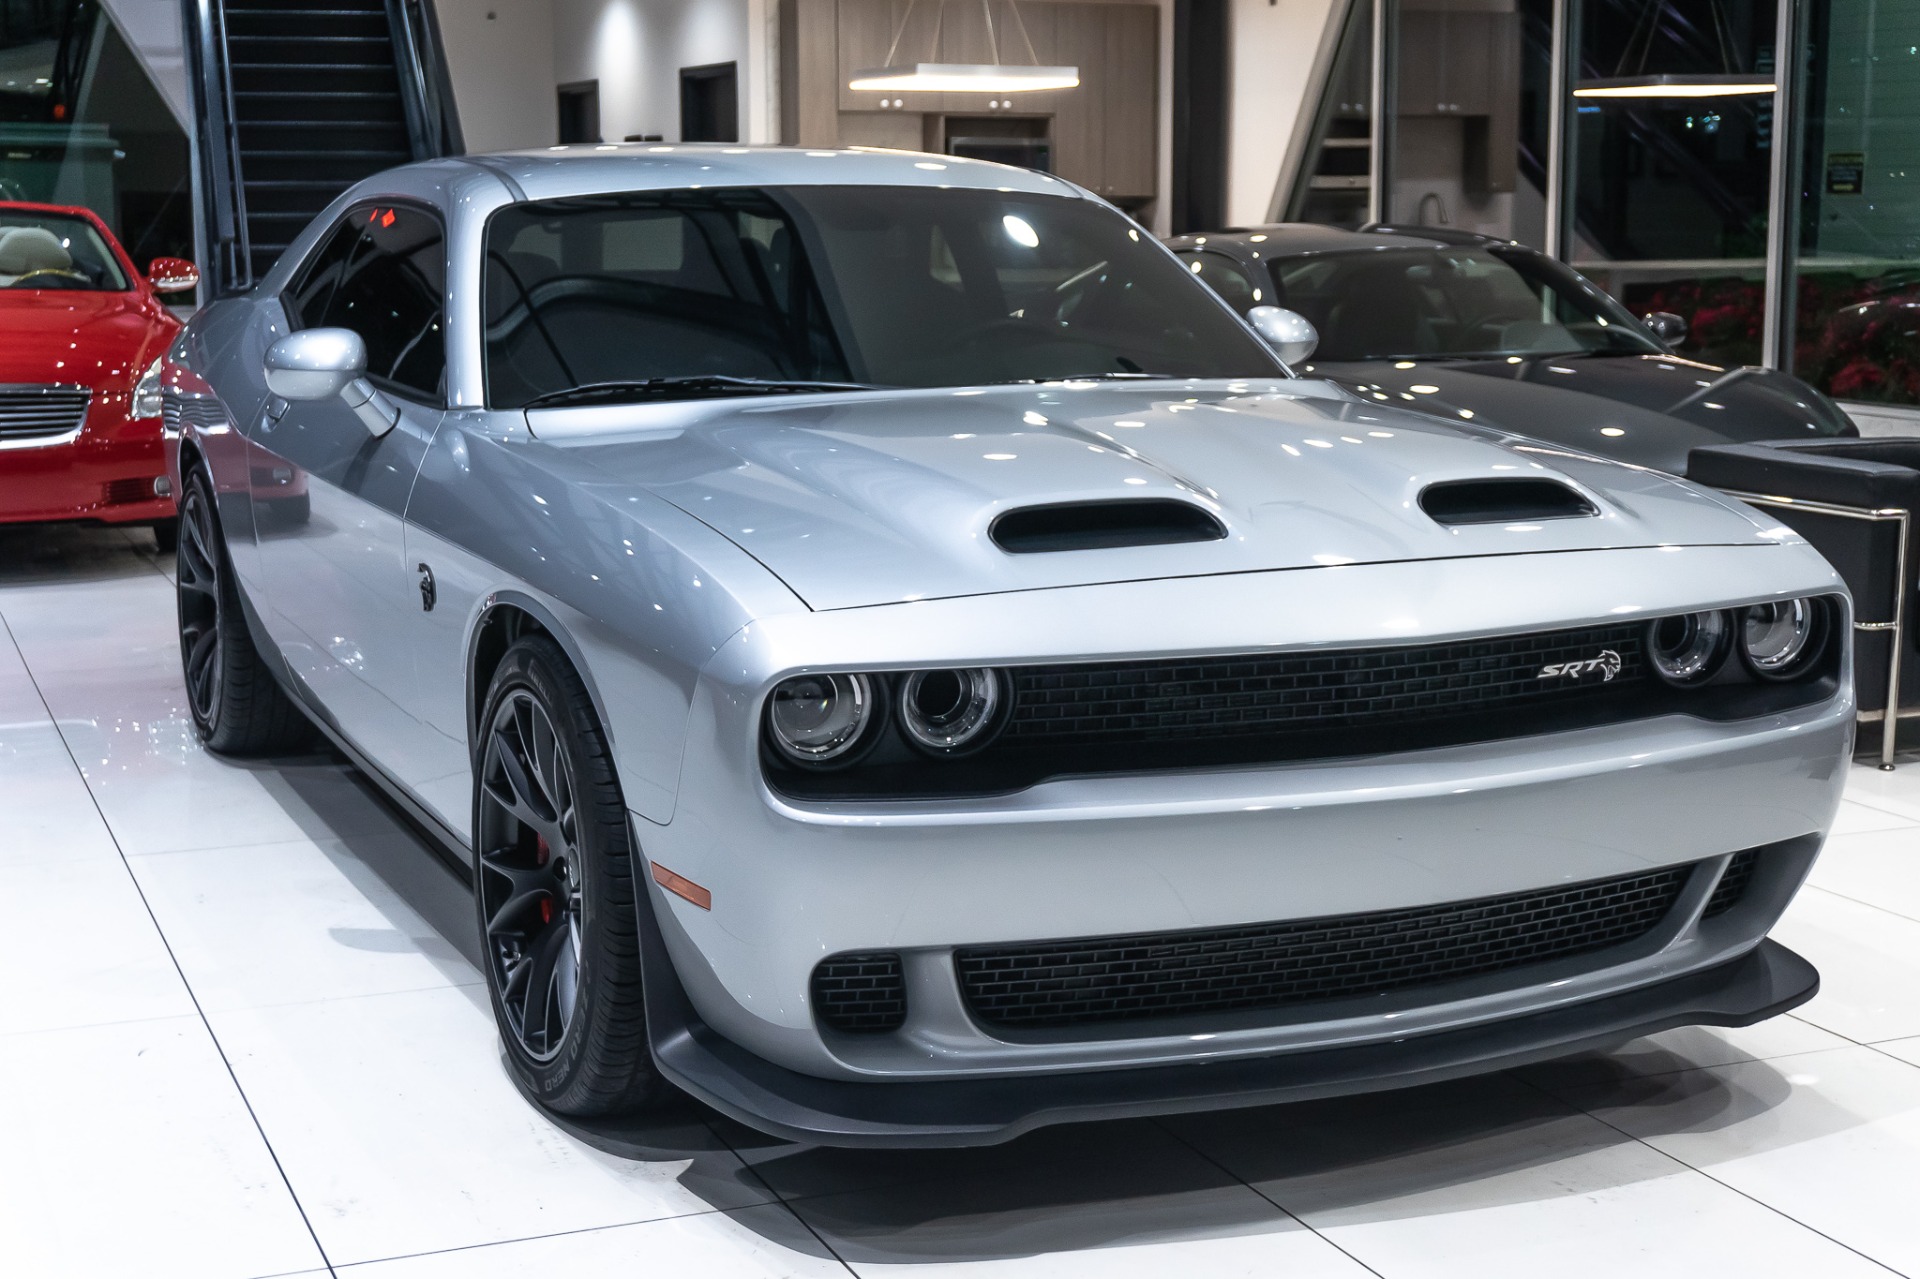 Used-2019-Dodge-Challenger-SRT-Hellcat-DRIVER-CONVENIENCE-PLUS-PACKAGE-MANUAL-TRANSMISSION-SPOILER